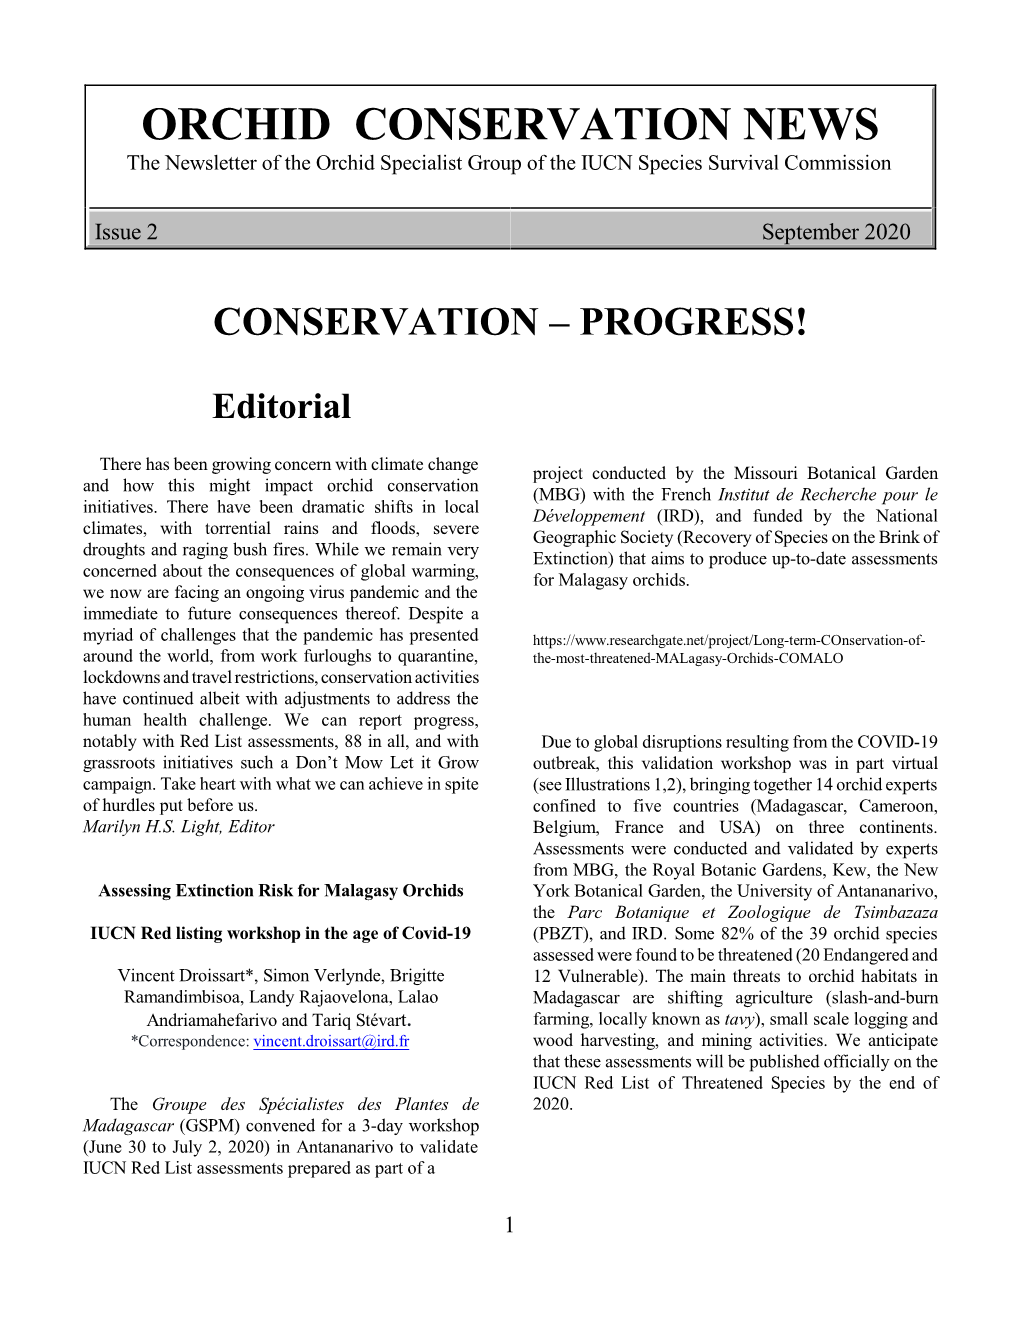 Orchid Conservation News September 2020